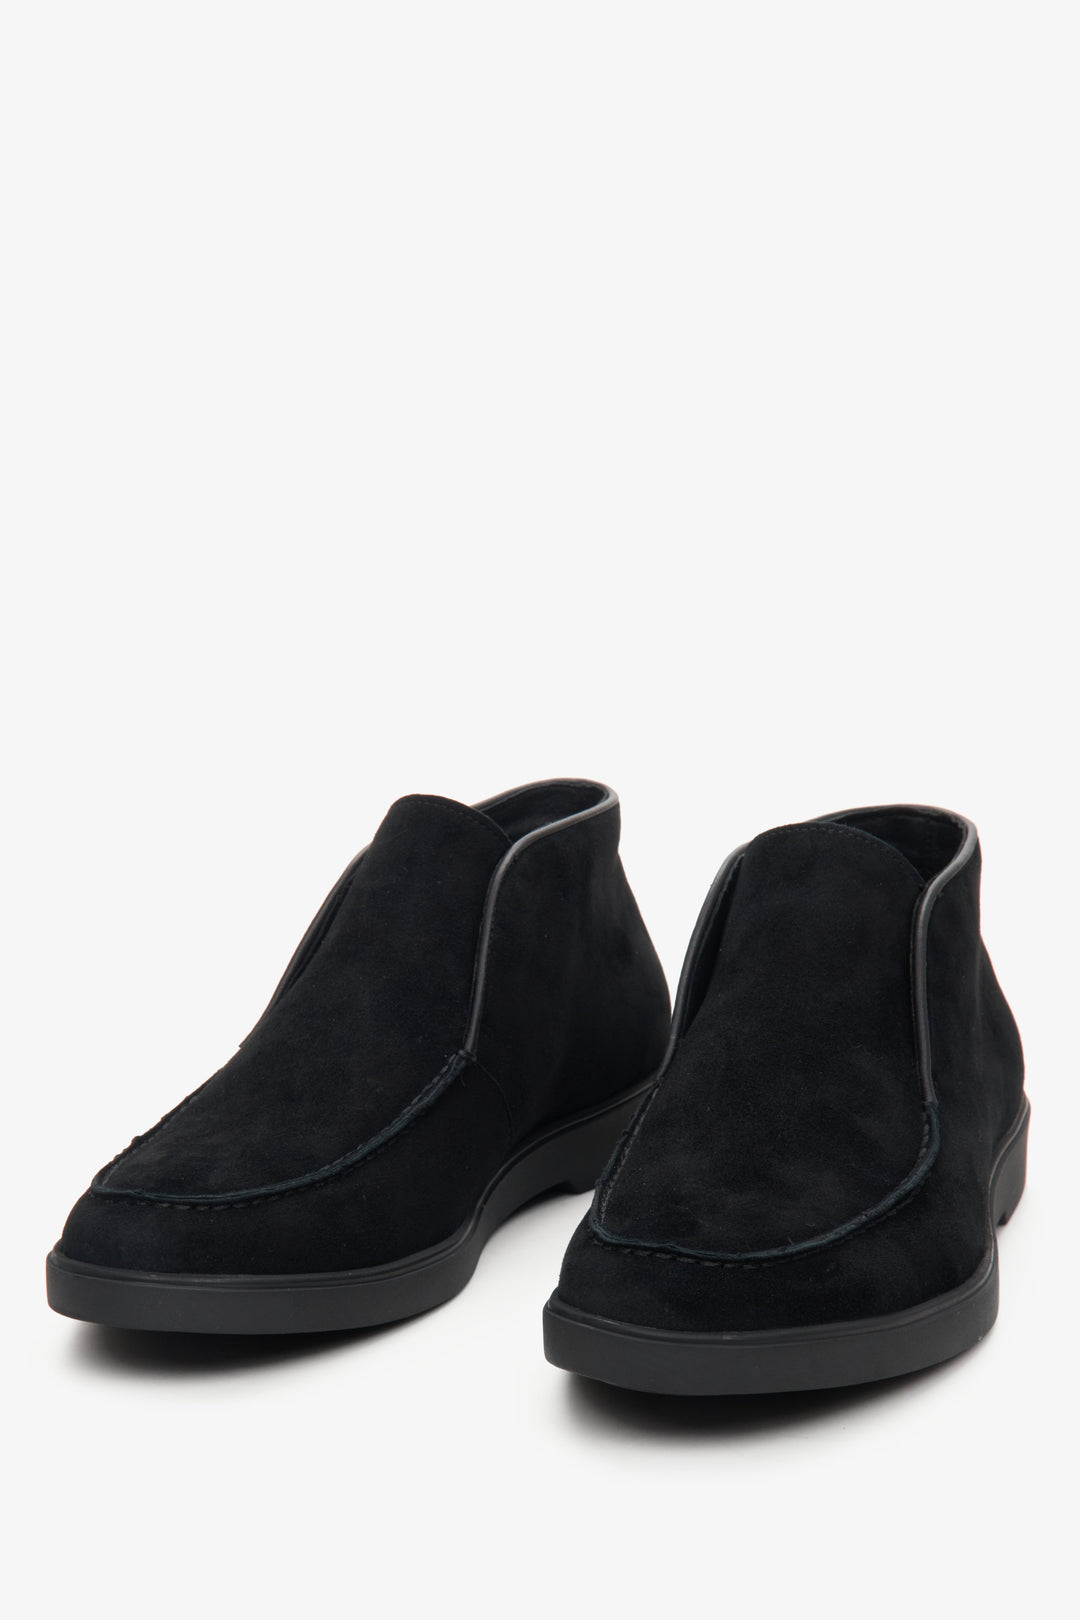 Men's black boots made of genuine velour in black colour - close-up on the toe of the shoe.